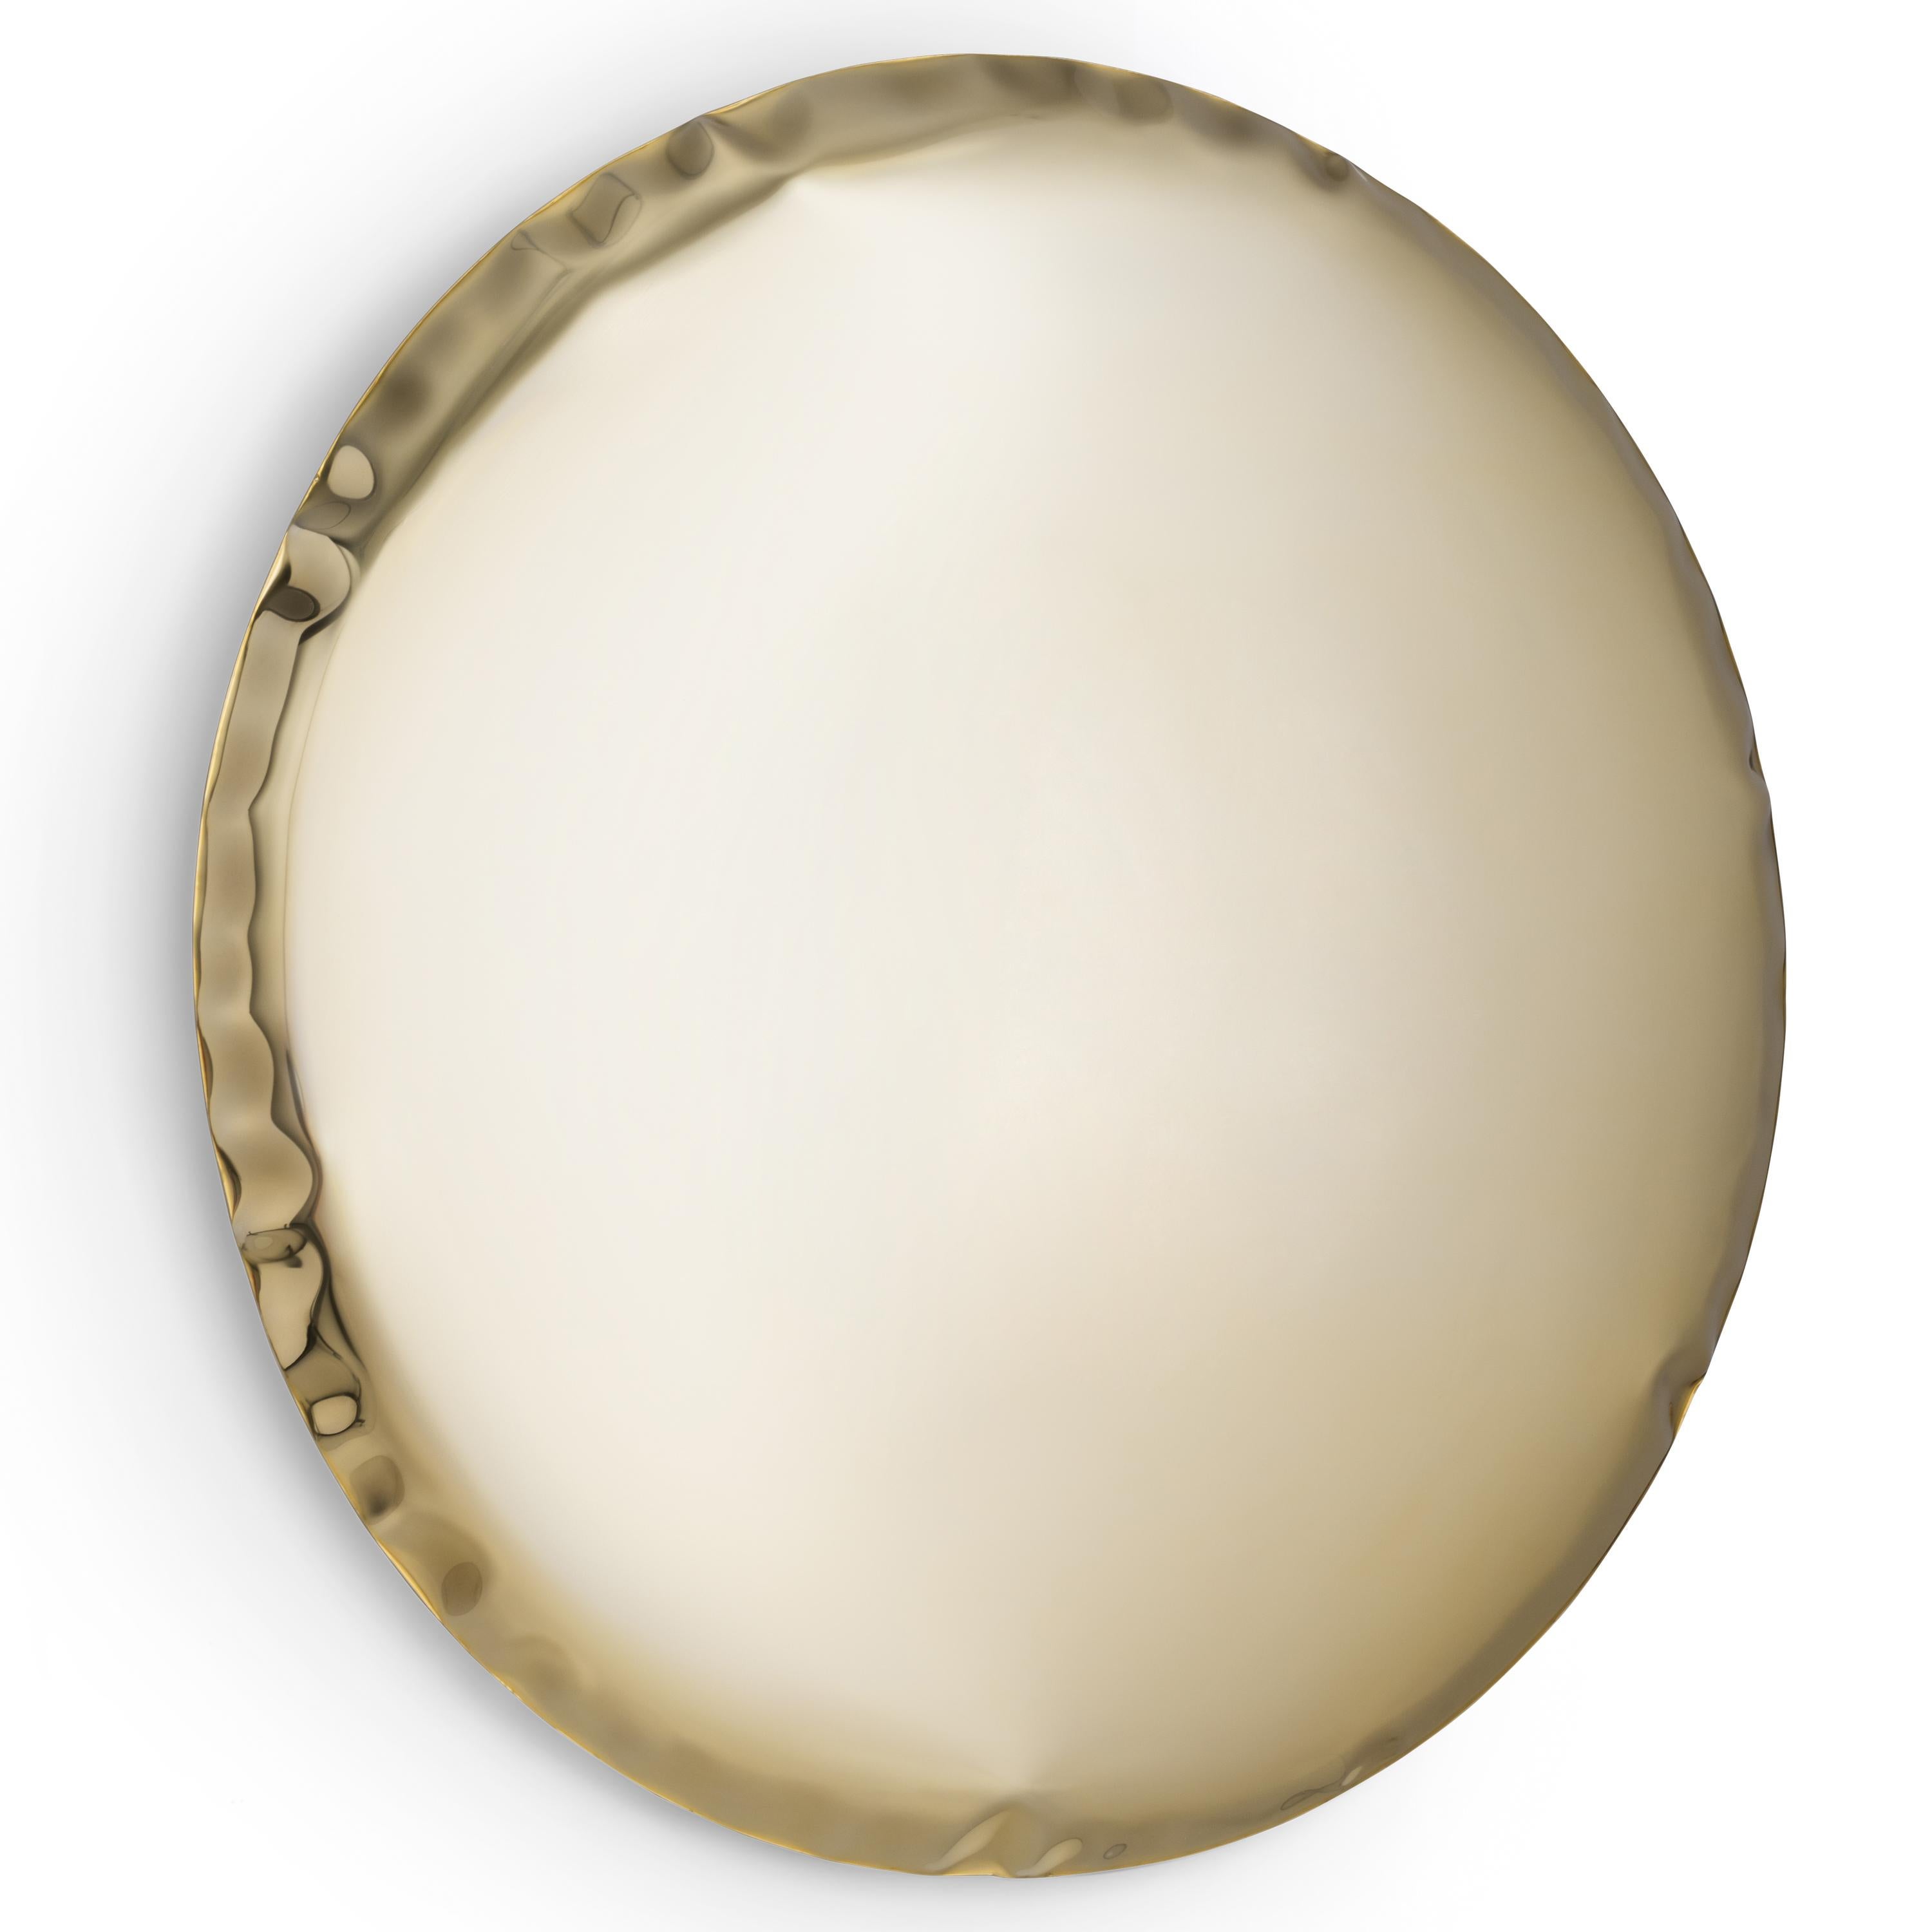 Contemporary Mirror 'OKO 150', AURUM Collection, Rose Gold, by Zieta For Sale 2